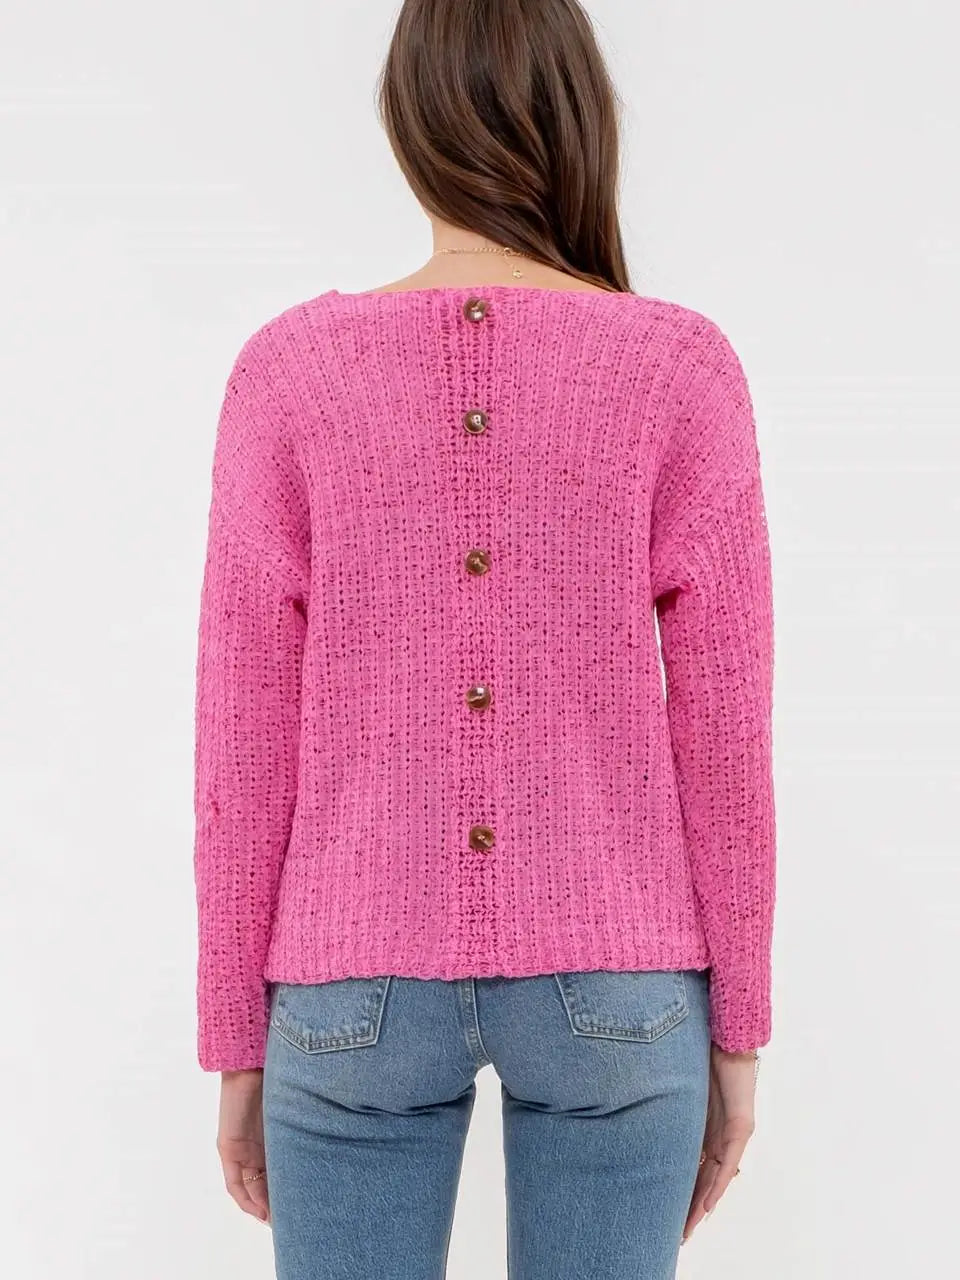 Fuchsia Back Buttoned Knit Pullover Sweater